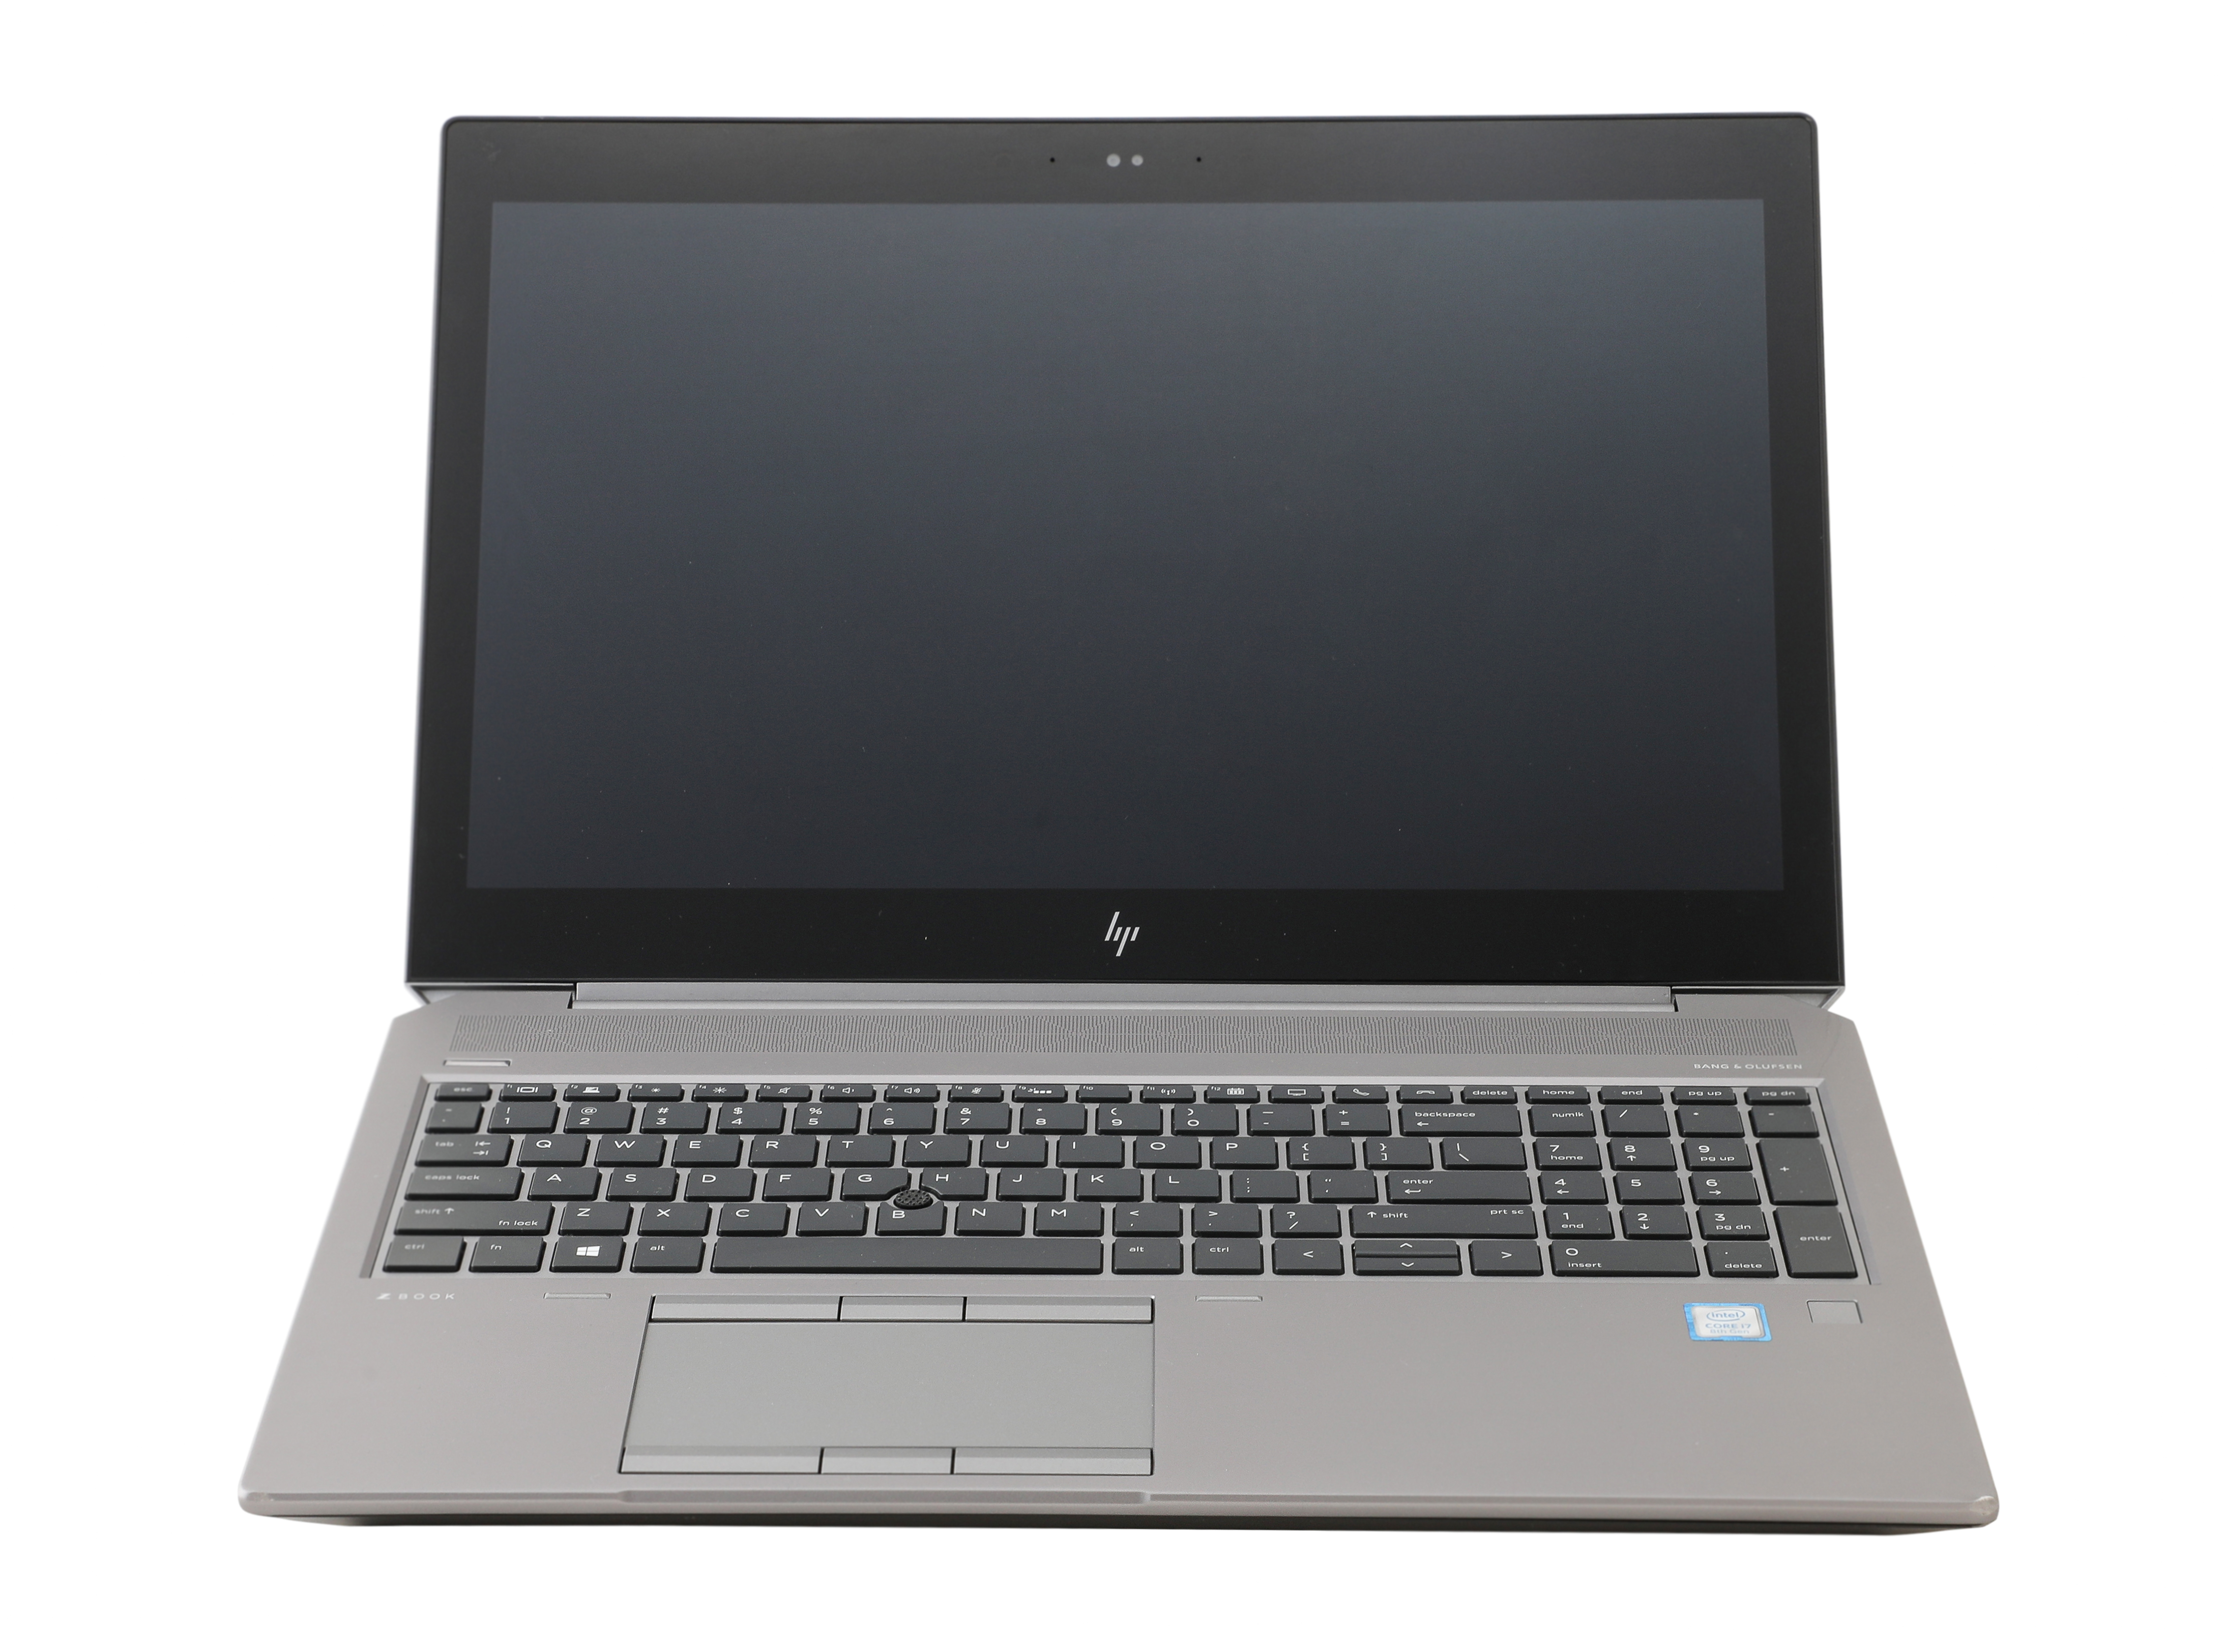 Used & Refurbished HP Laptops in Dubai, UAE, Affordable Prices | Maplestar